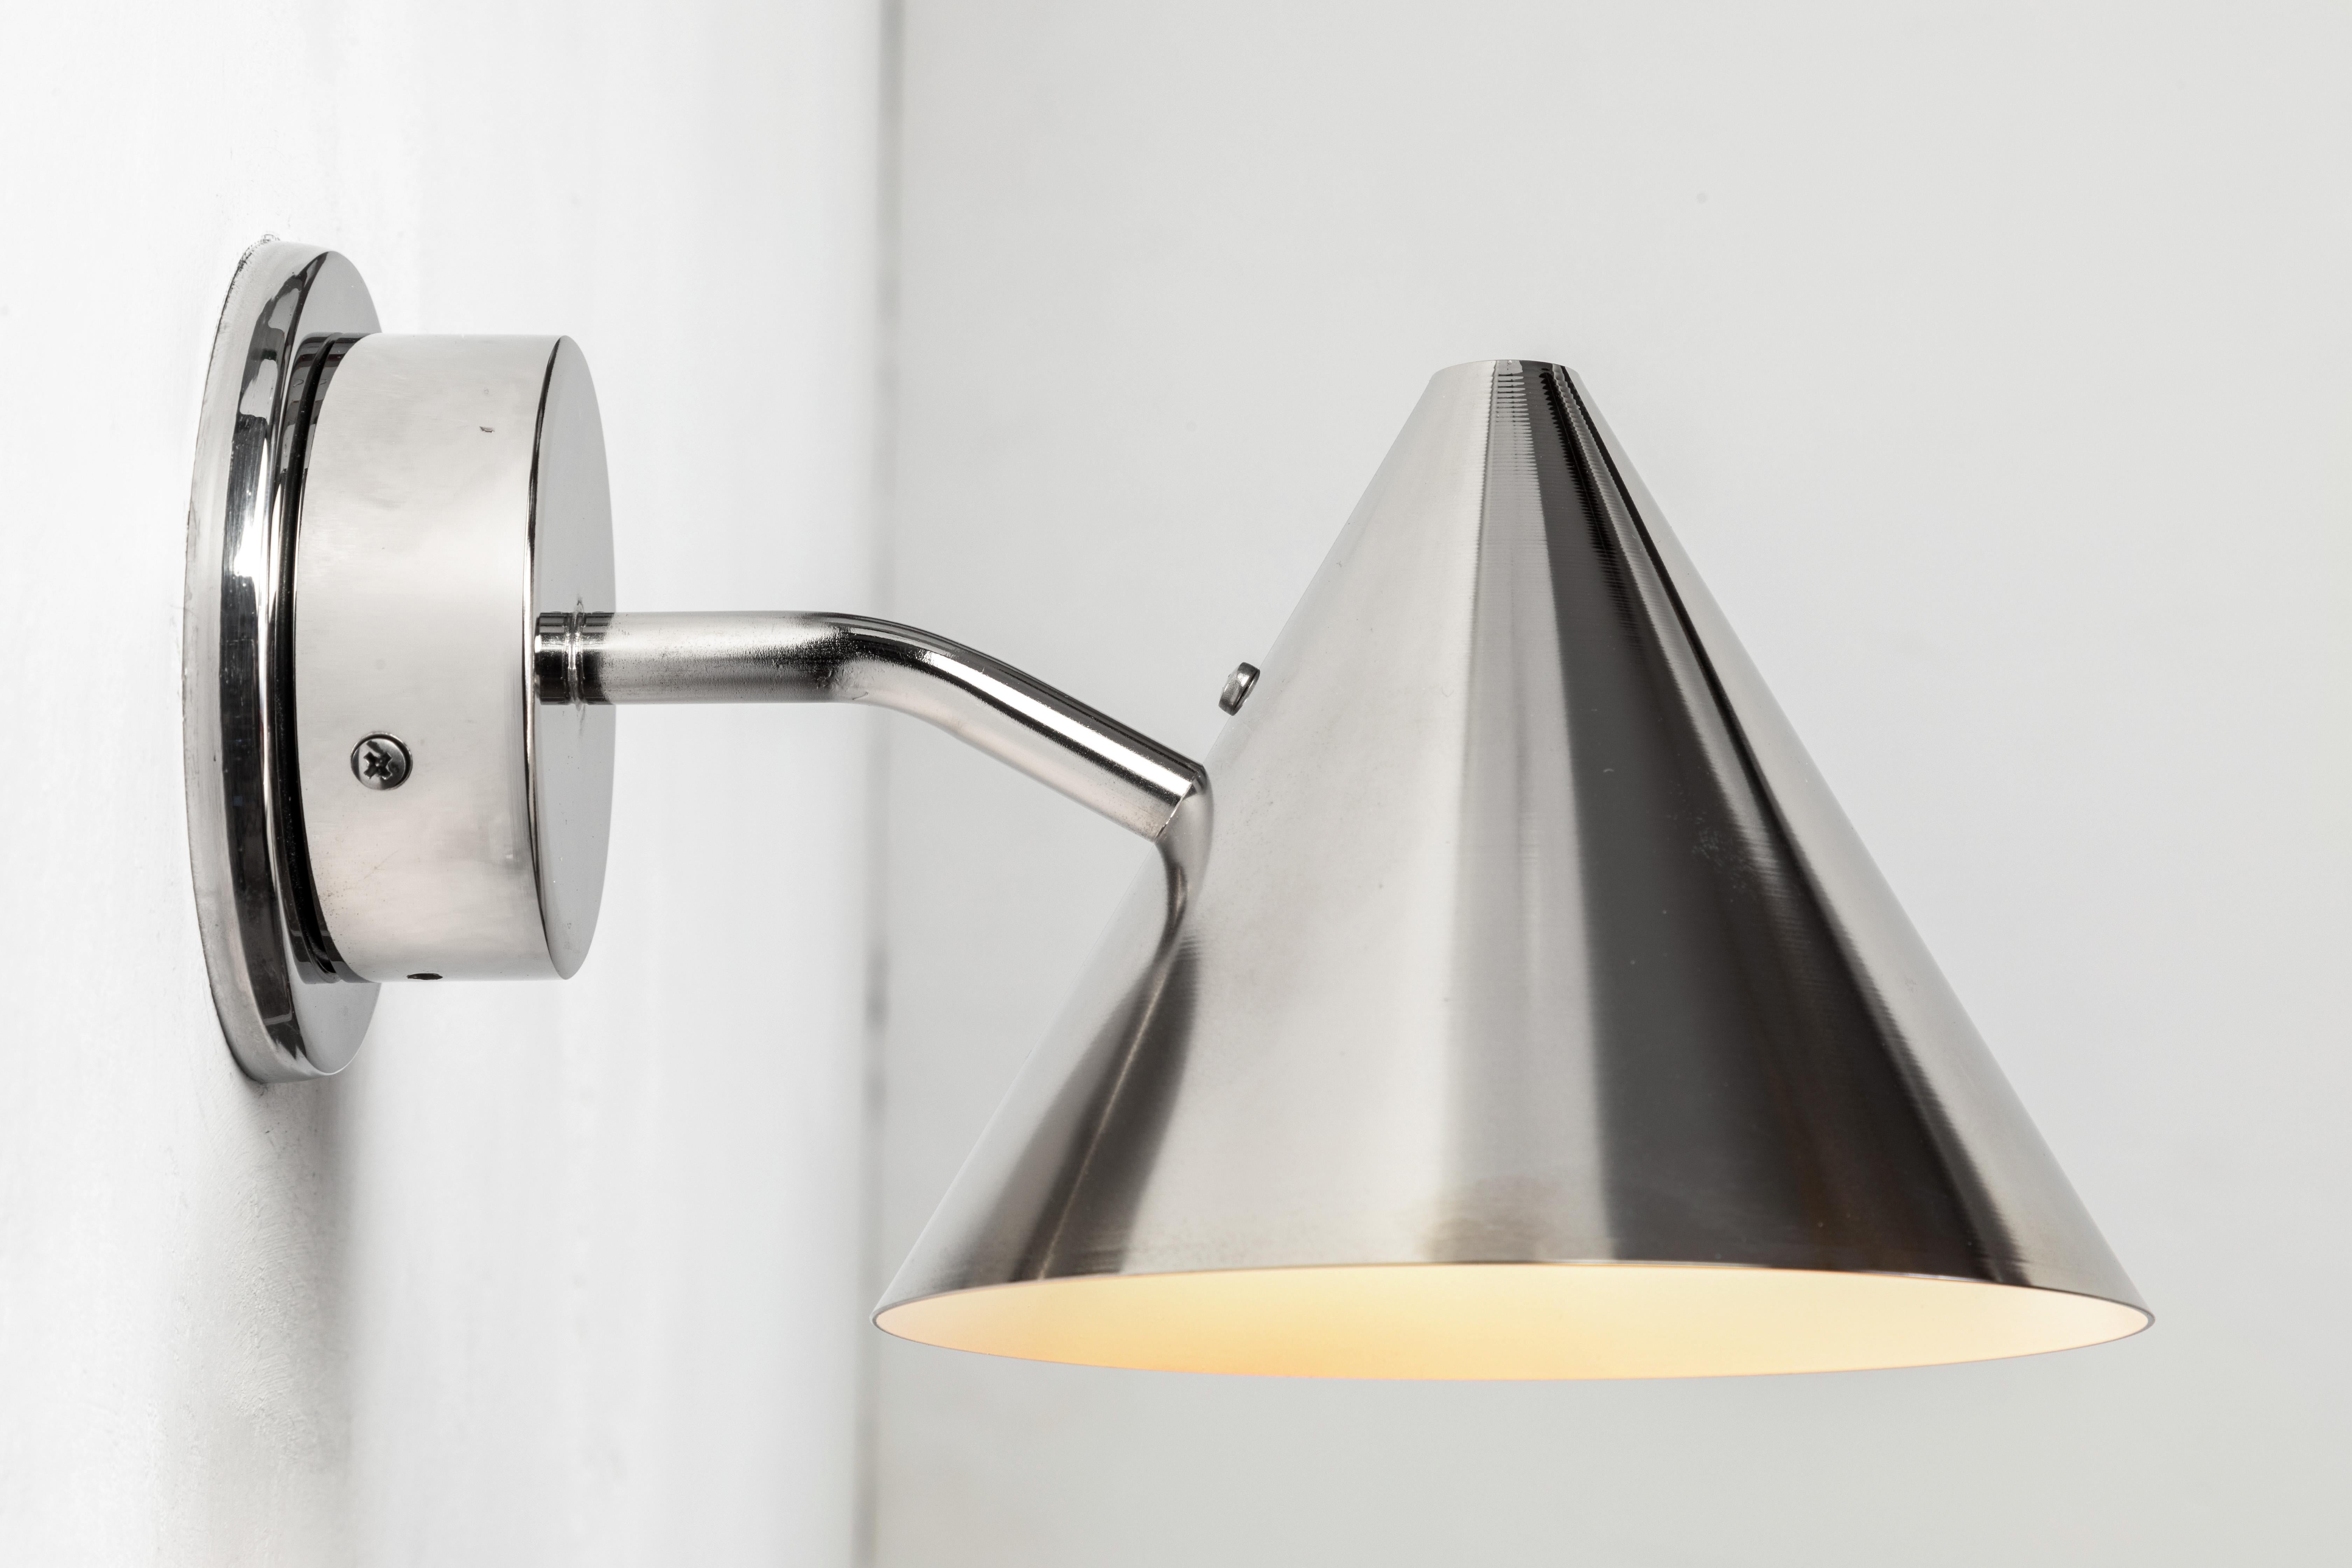 Hans-Agne Jakobsson 'Mini-Tratten' polished nickel outdoor sconce. An exclusive made for U.S. and UL listed authorized re-edition of the classic Swedish design executed in polished nickel. An incredibly refined design that is quintessentially